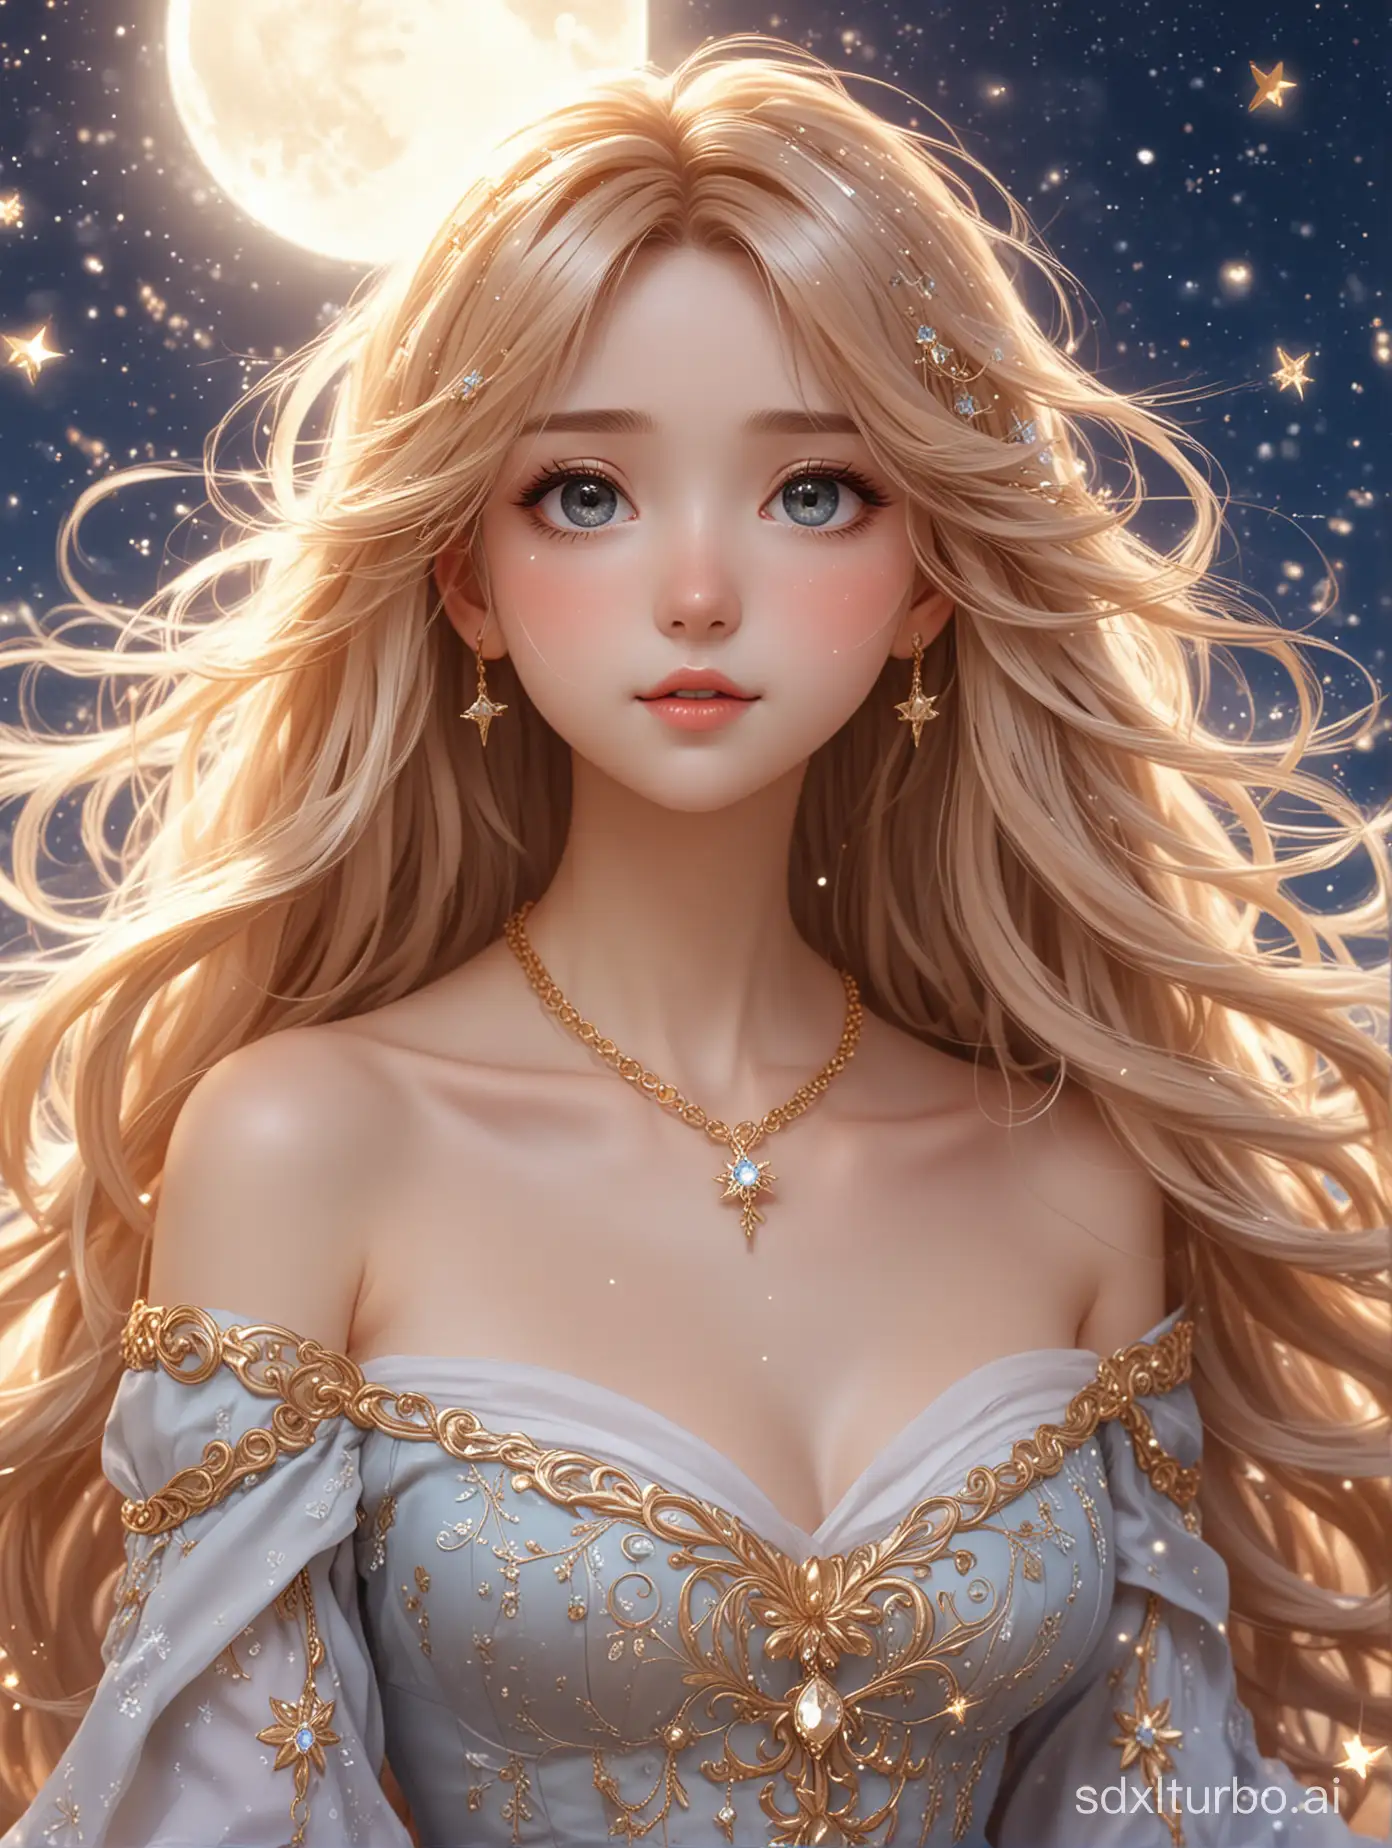 Ethereal-Anime-Girl-with-Flowing-Hair-and-Starry-Sky-Background